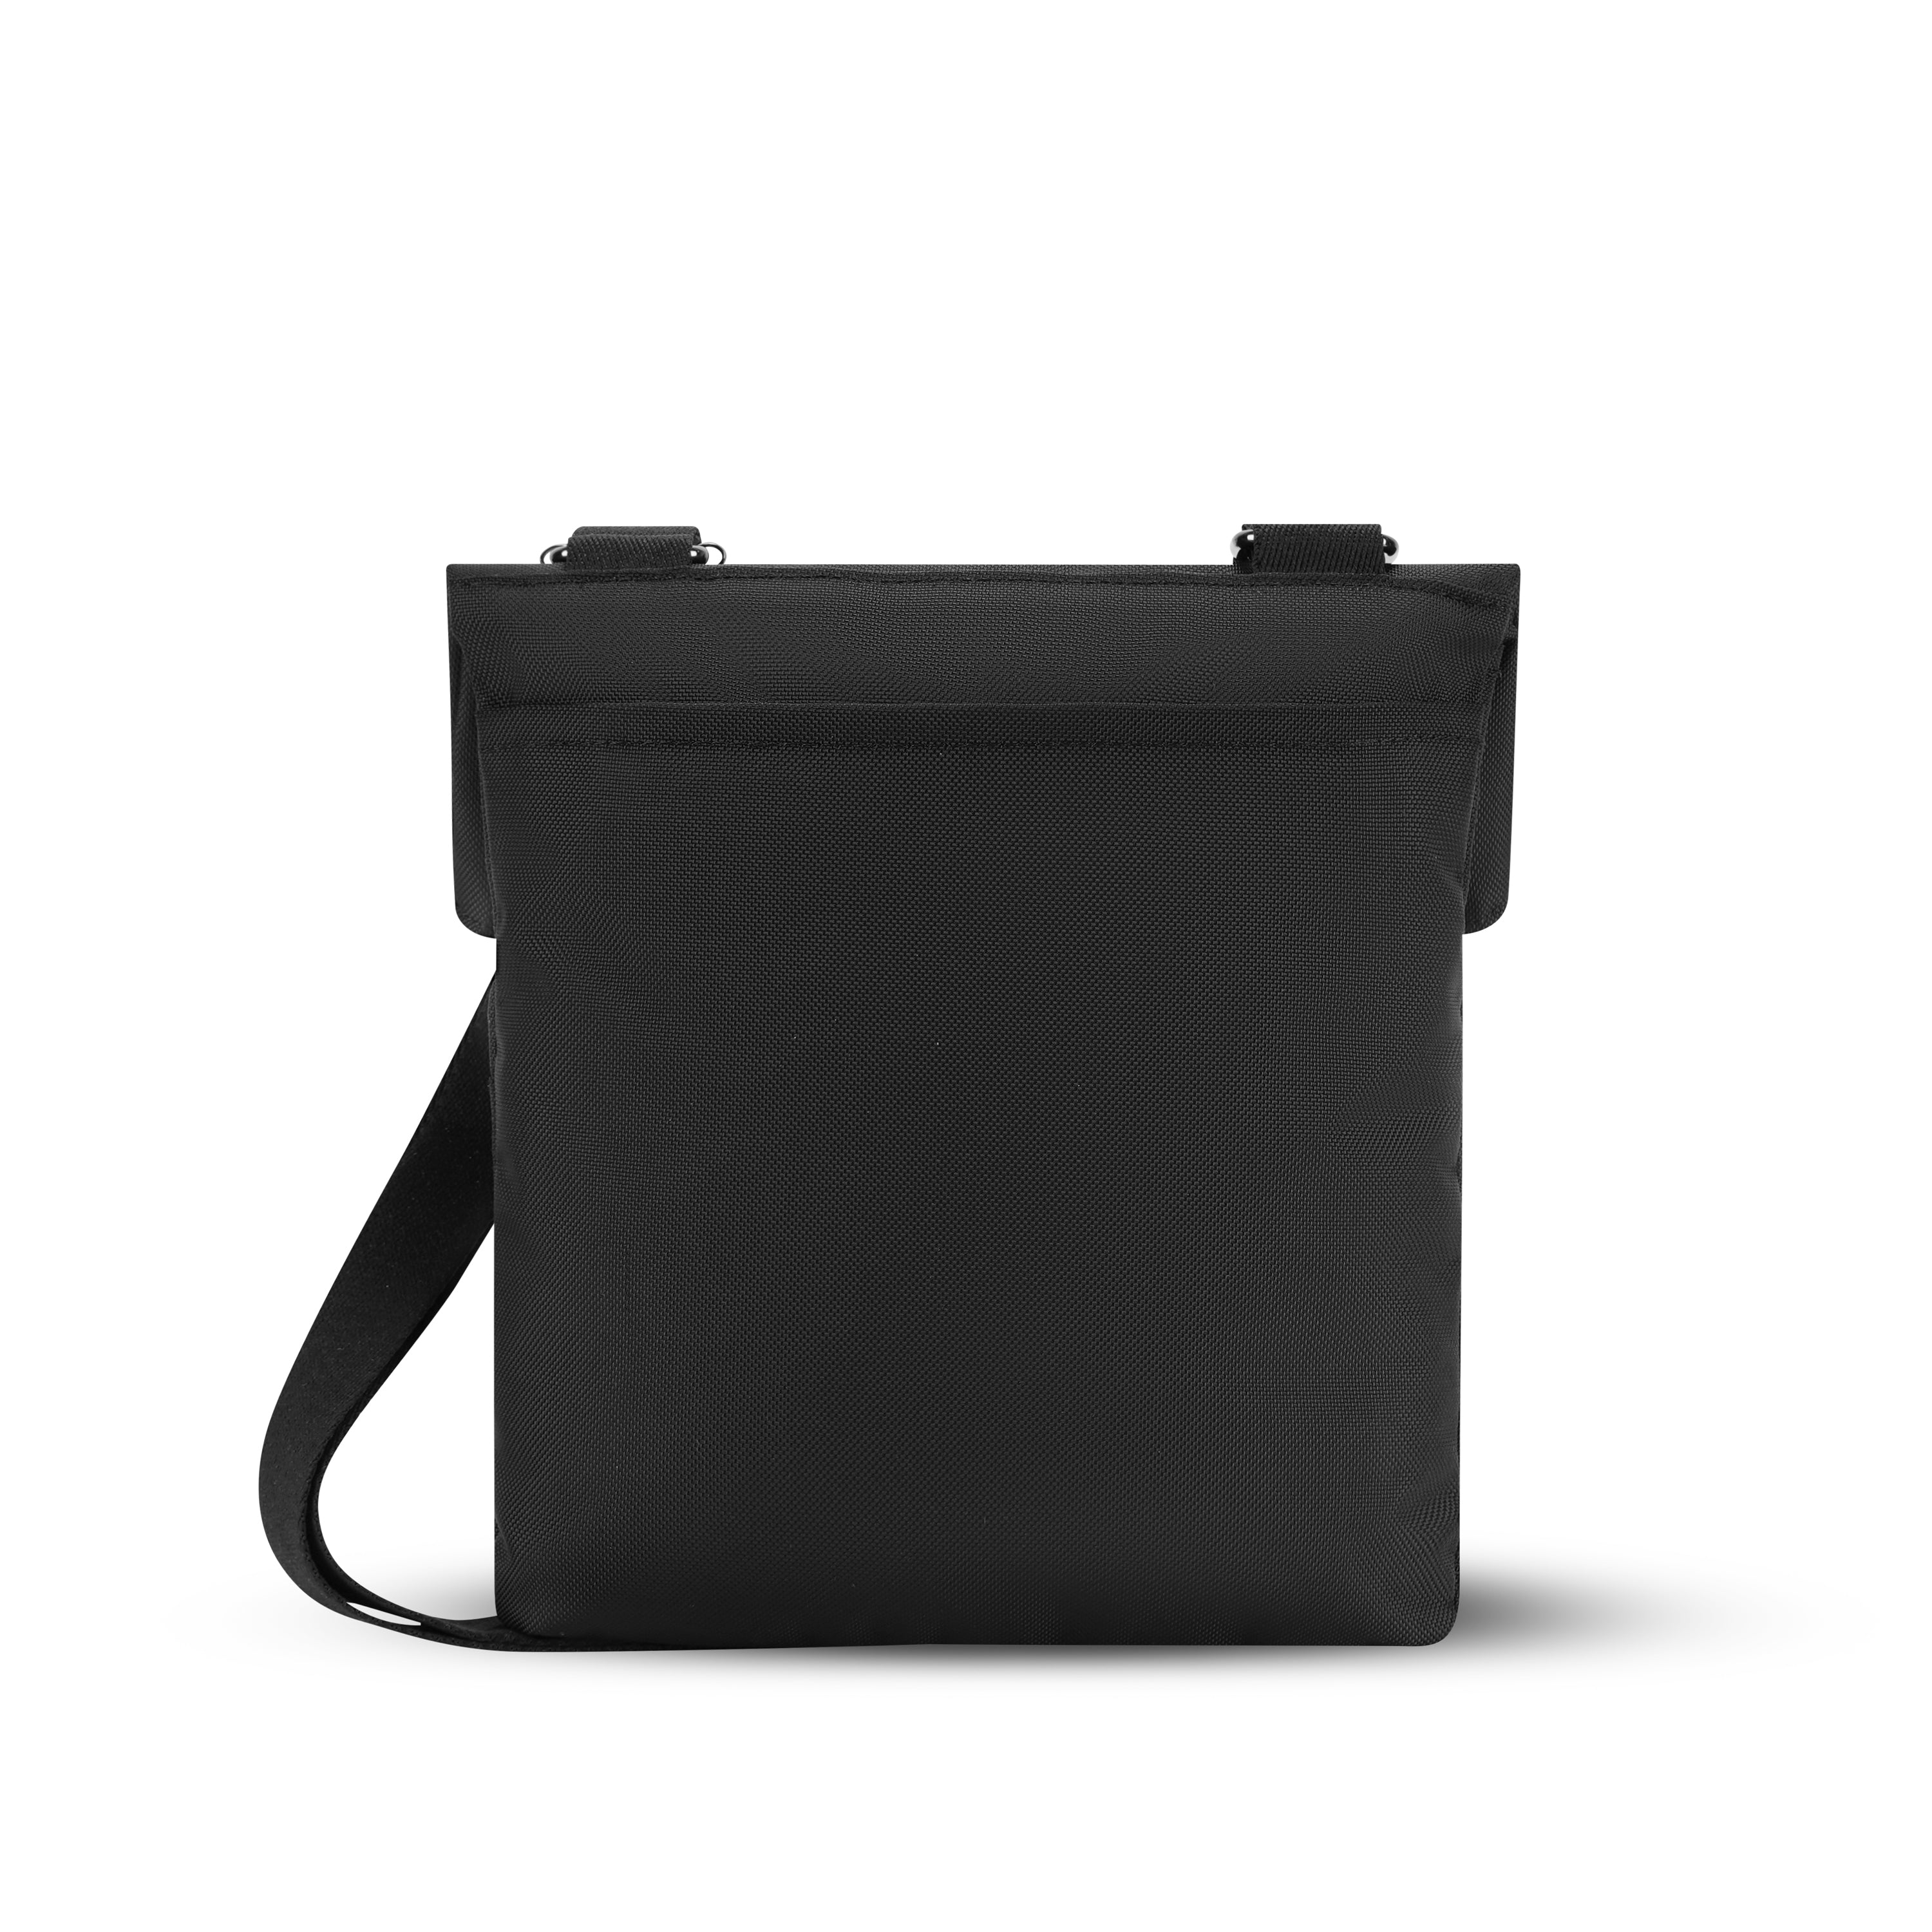 Back view of Sherpani crossbody, the Pica in Raven. The back of the bag features an external pouch.